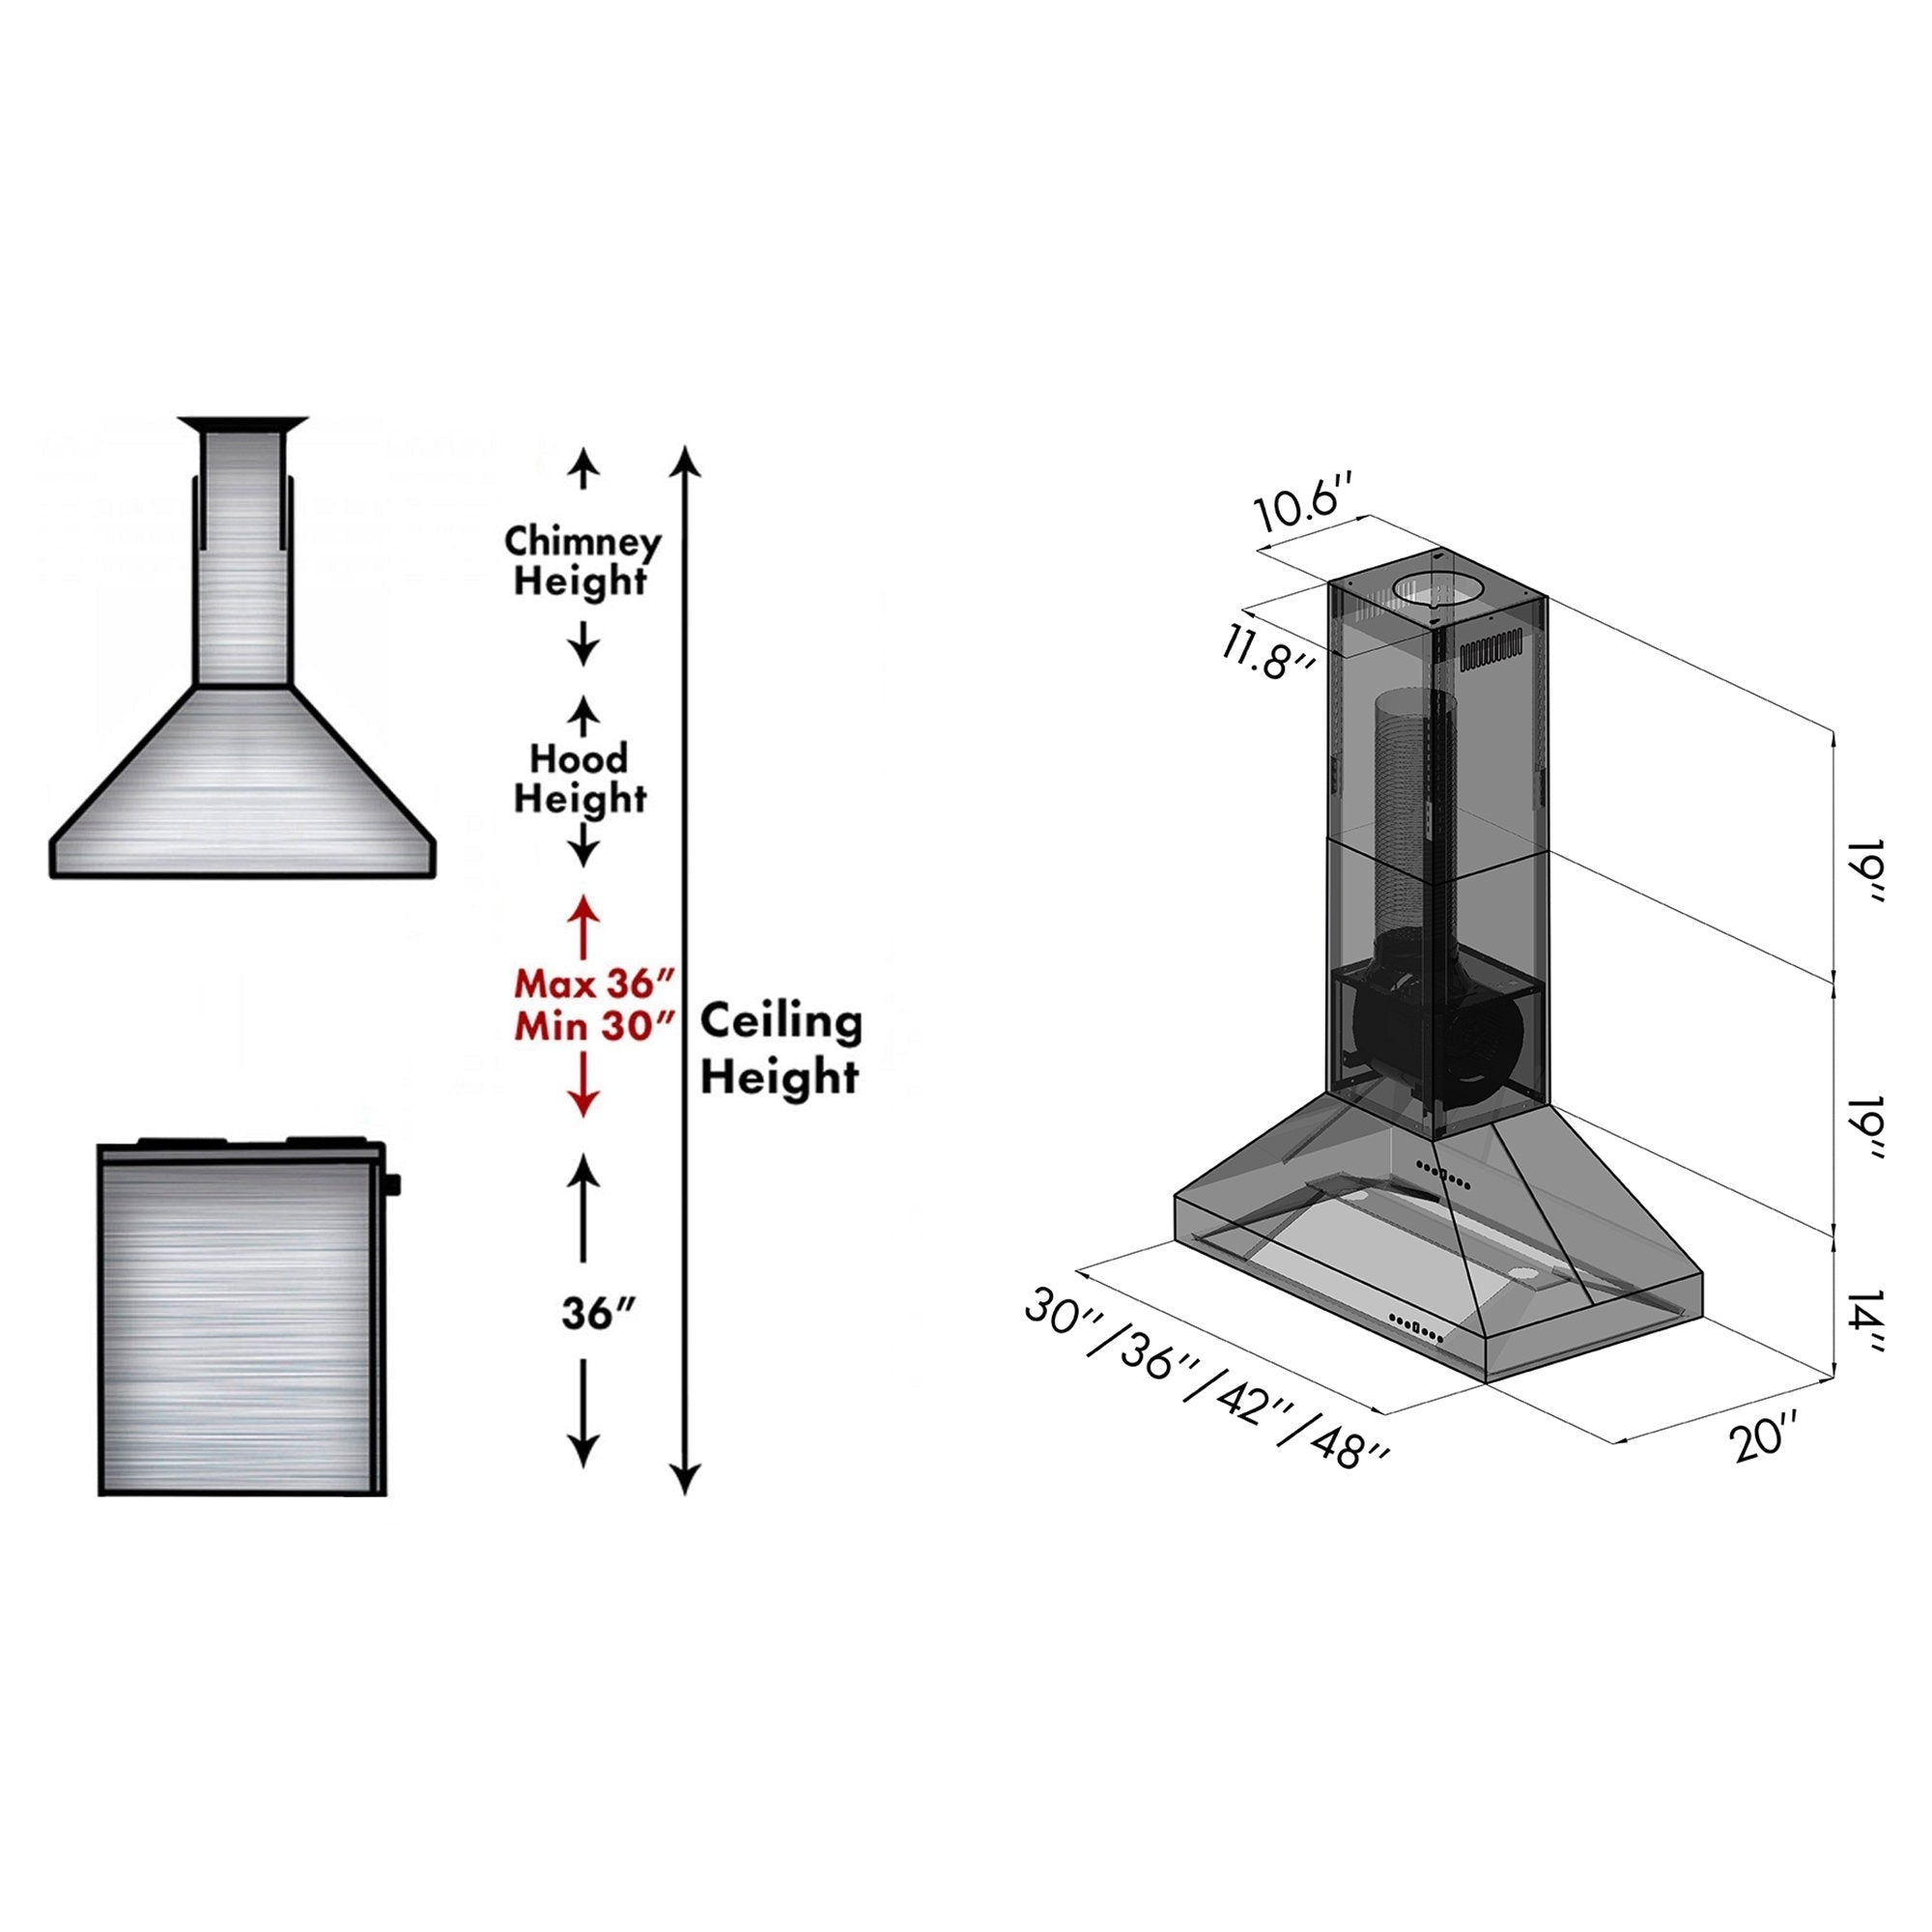 ZLINE Ducted Island Mount Range Hood in Outdoor Approved Stainless Steel (597i-304) dimensional measurements and chimney height guide.